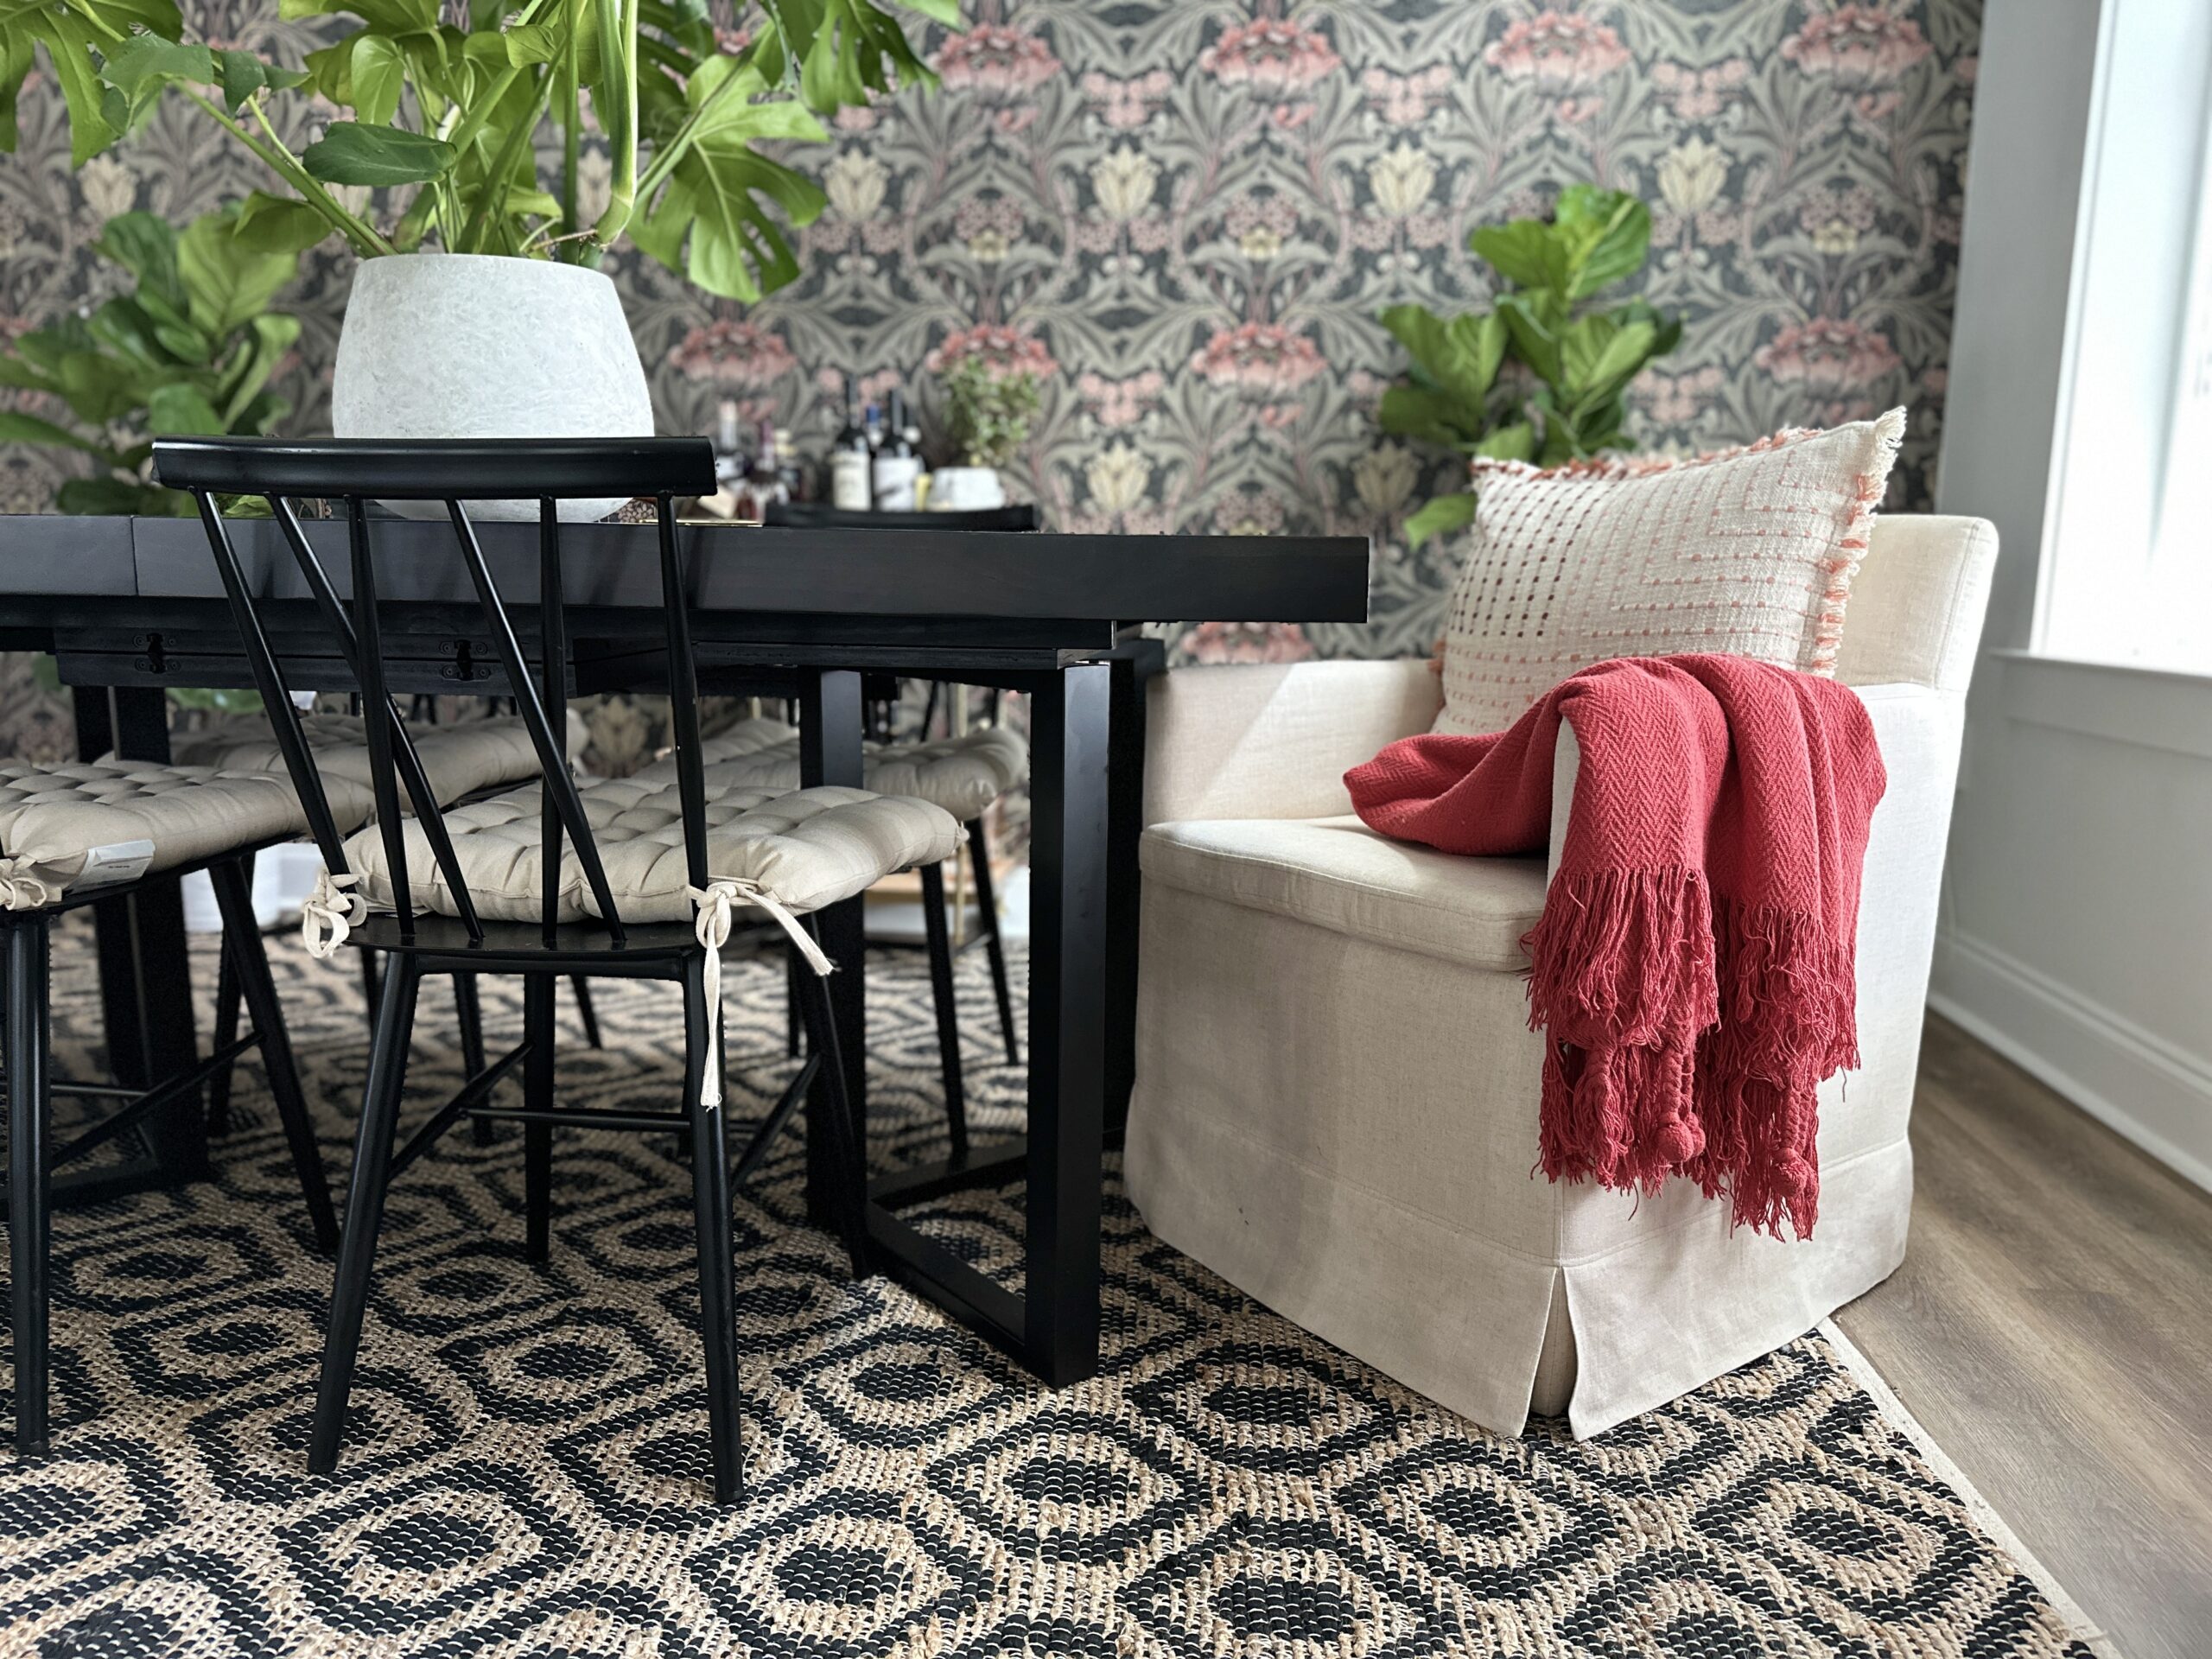 Does a Rug Belong Under a Dining Table? Here's How to Tell.